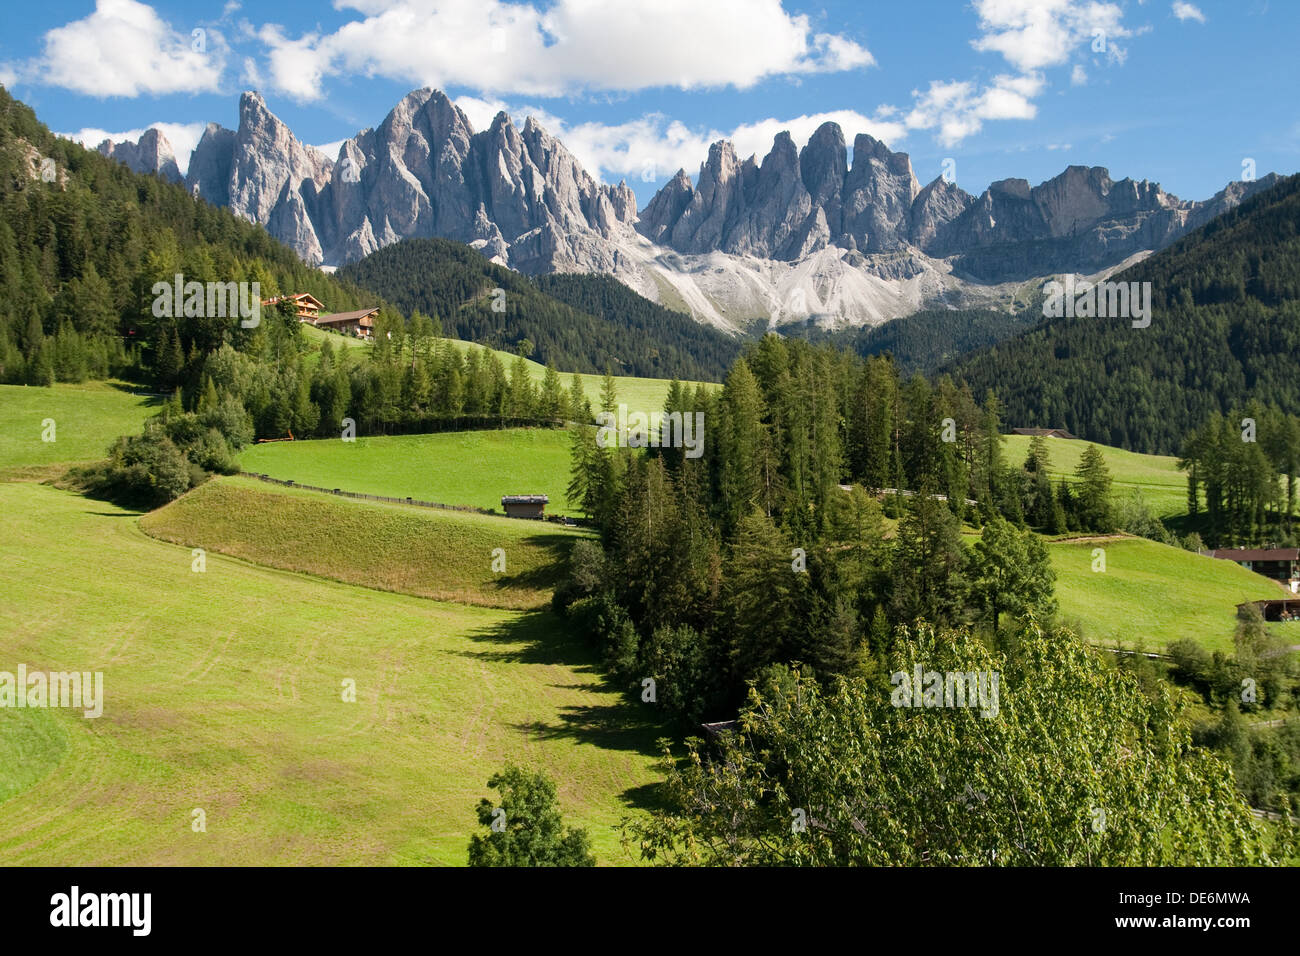 Valley of Villnoss in South Tirol, Italy. Stock Photo